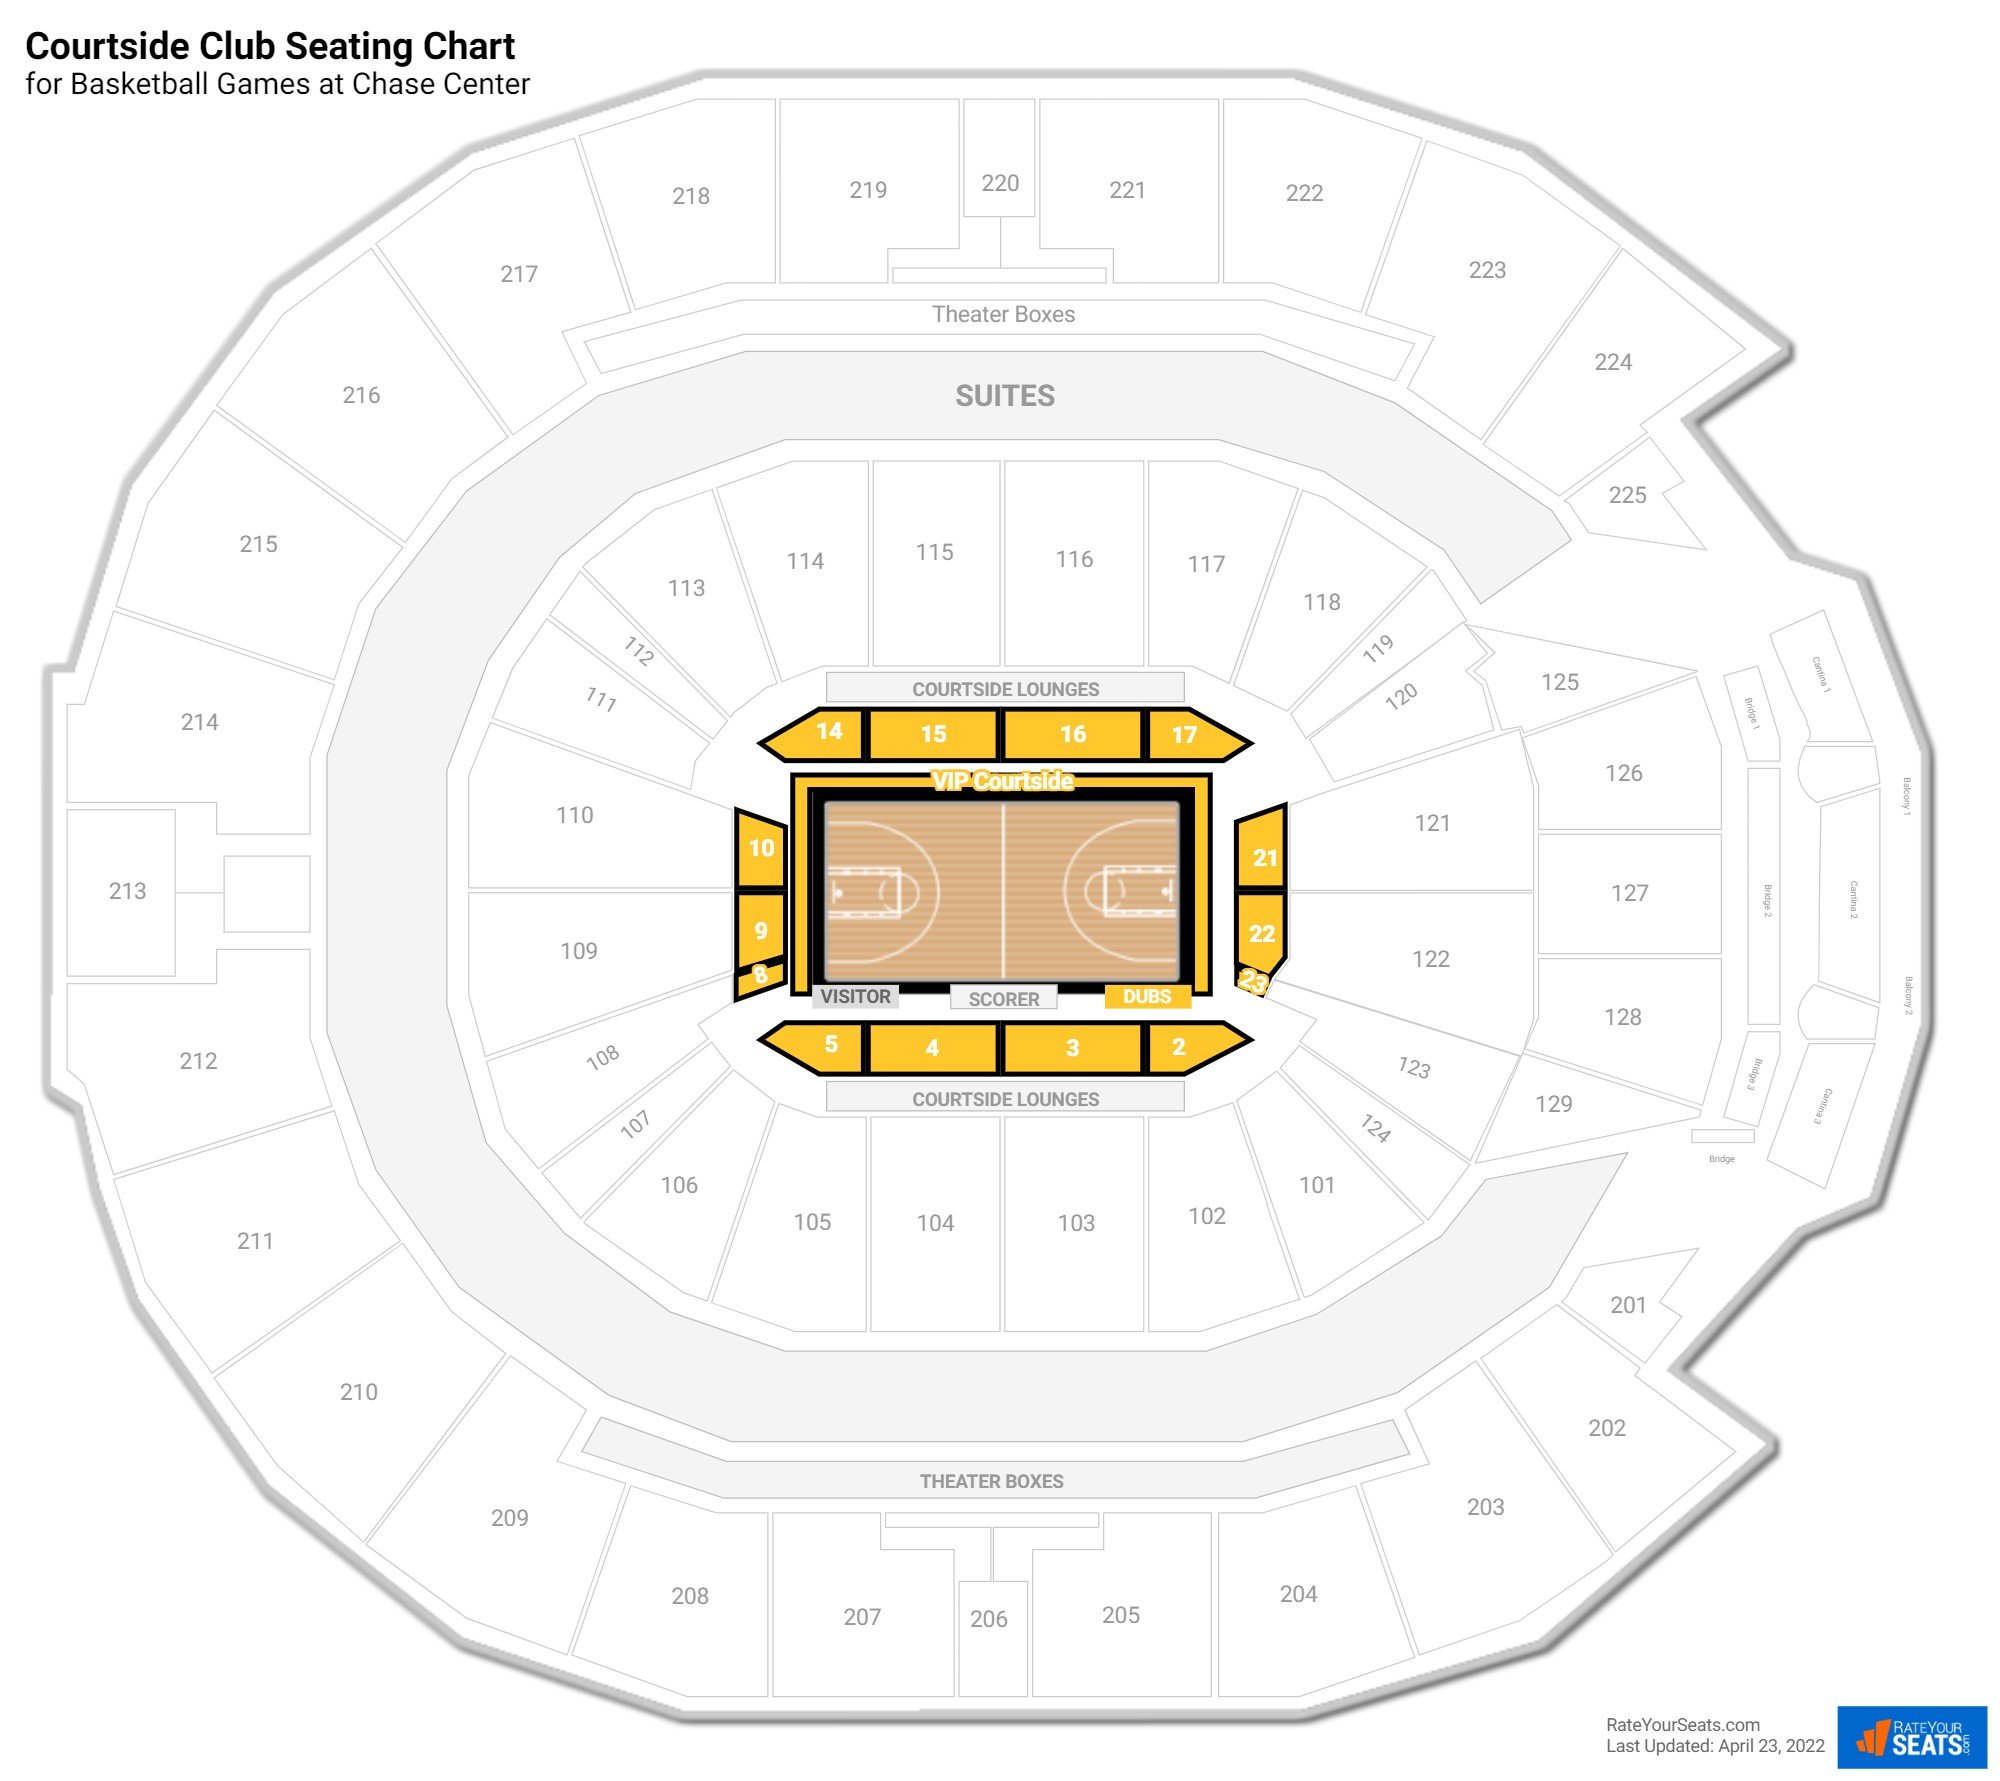 Basketball Courtside Club Seating Chart at Chase Center